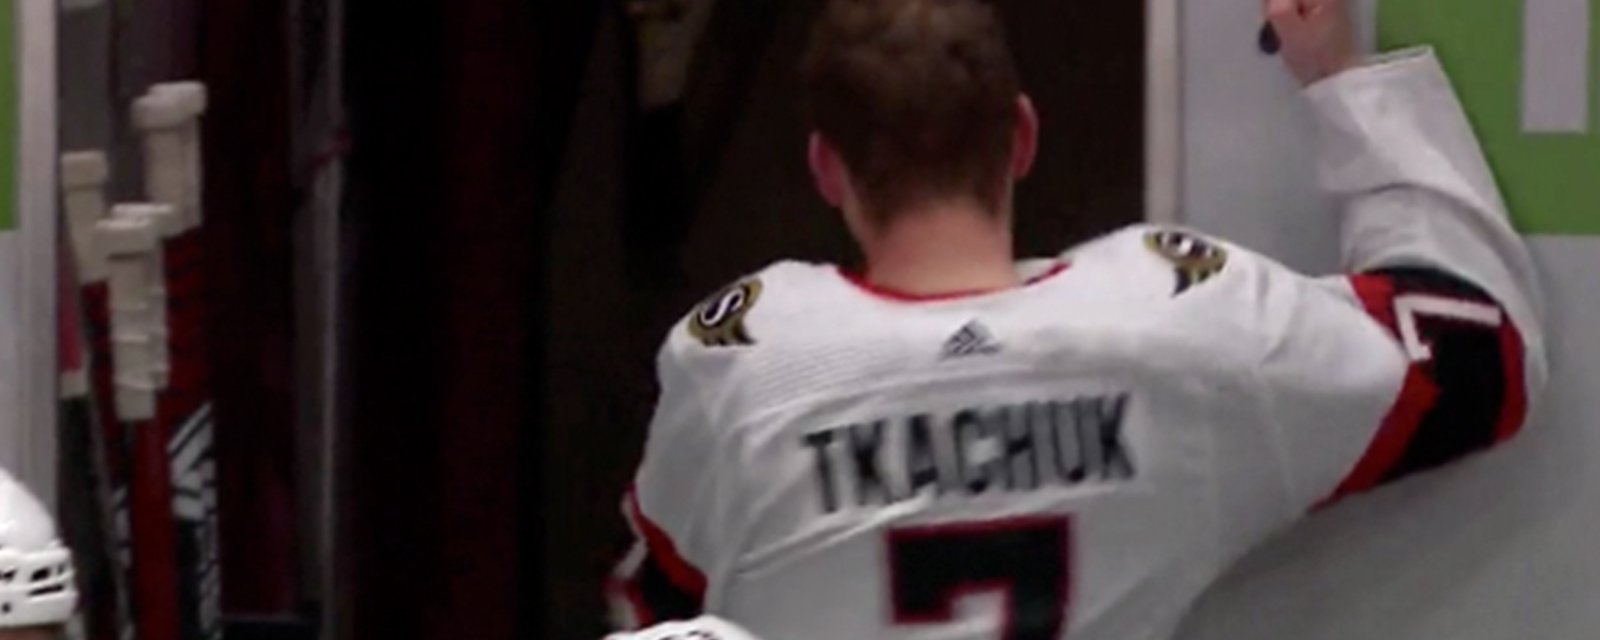 Brady Tkachuk mimics his brother, has a fit after fighting Canucks' MacEwen